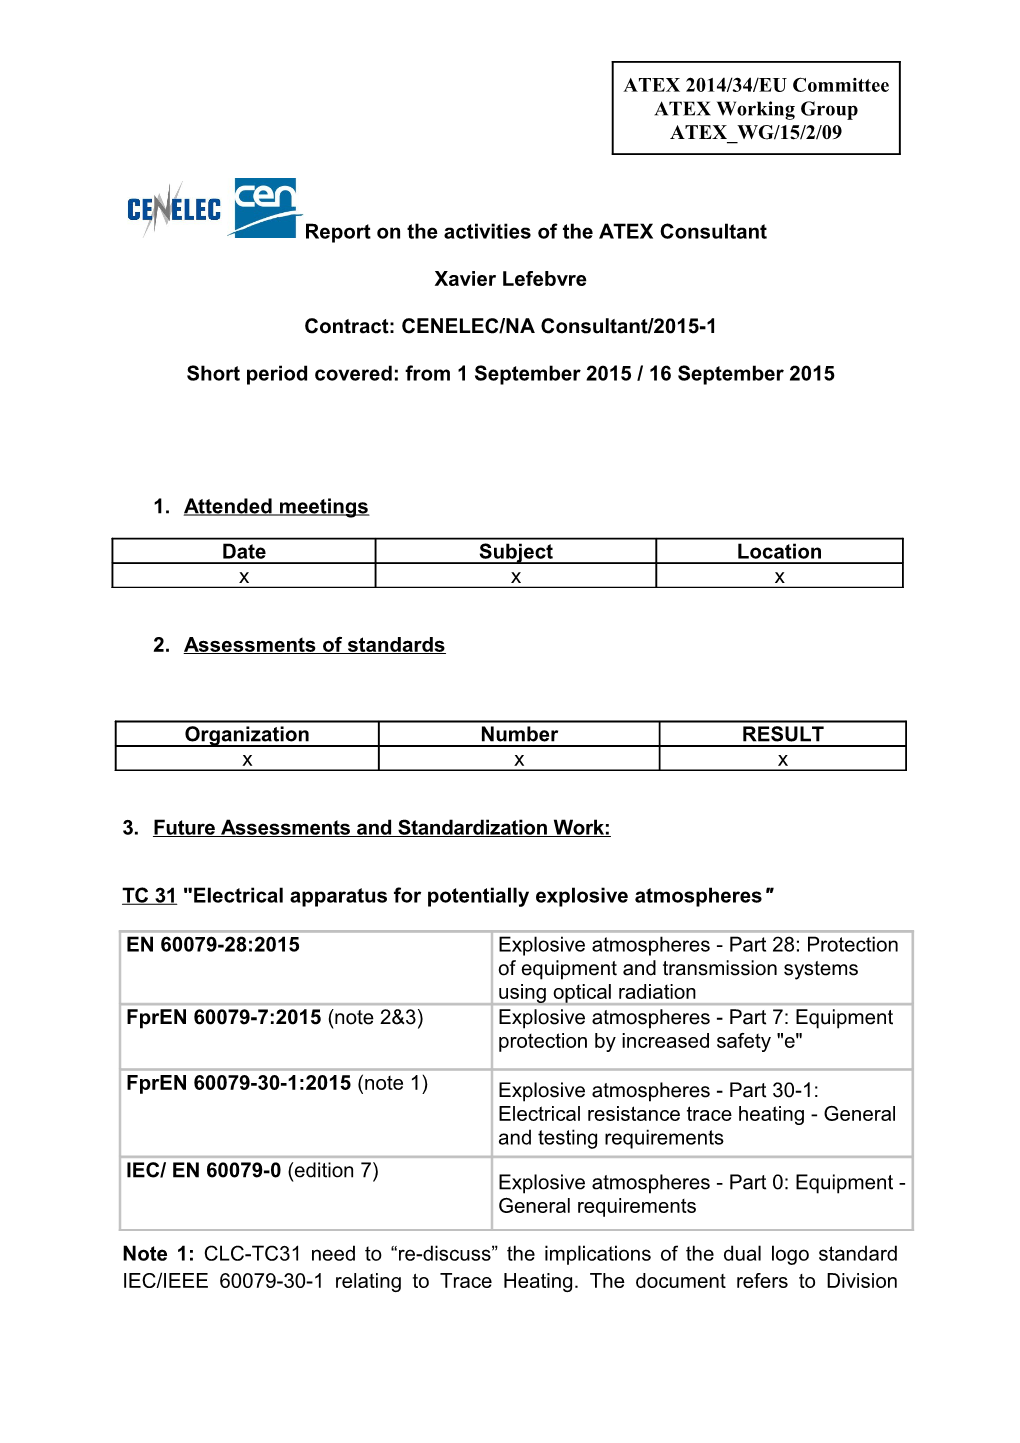 ATEX WG/15/2/09 - Report on the Activities of the ATEX Consultant 2015Part1